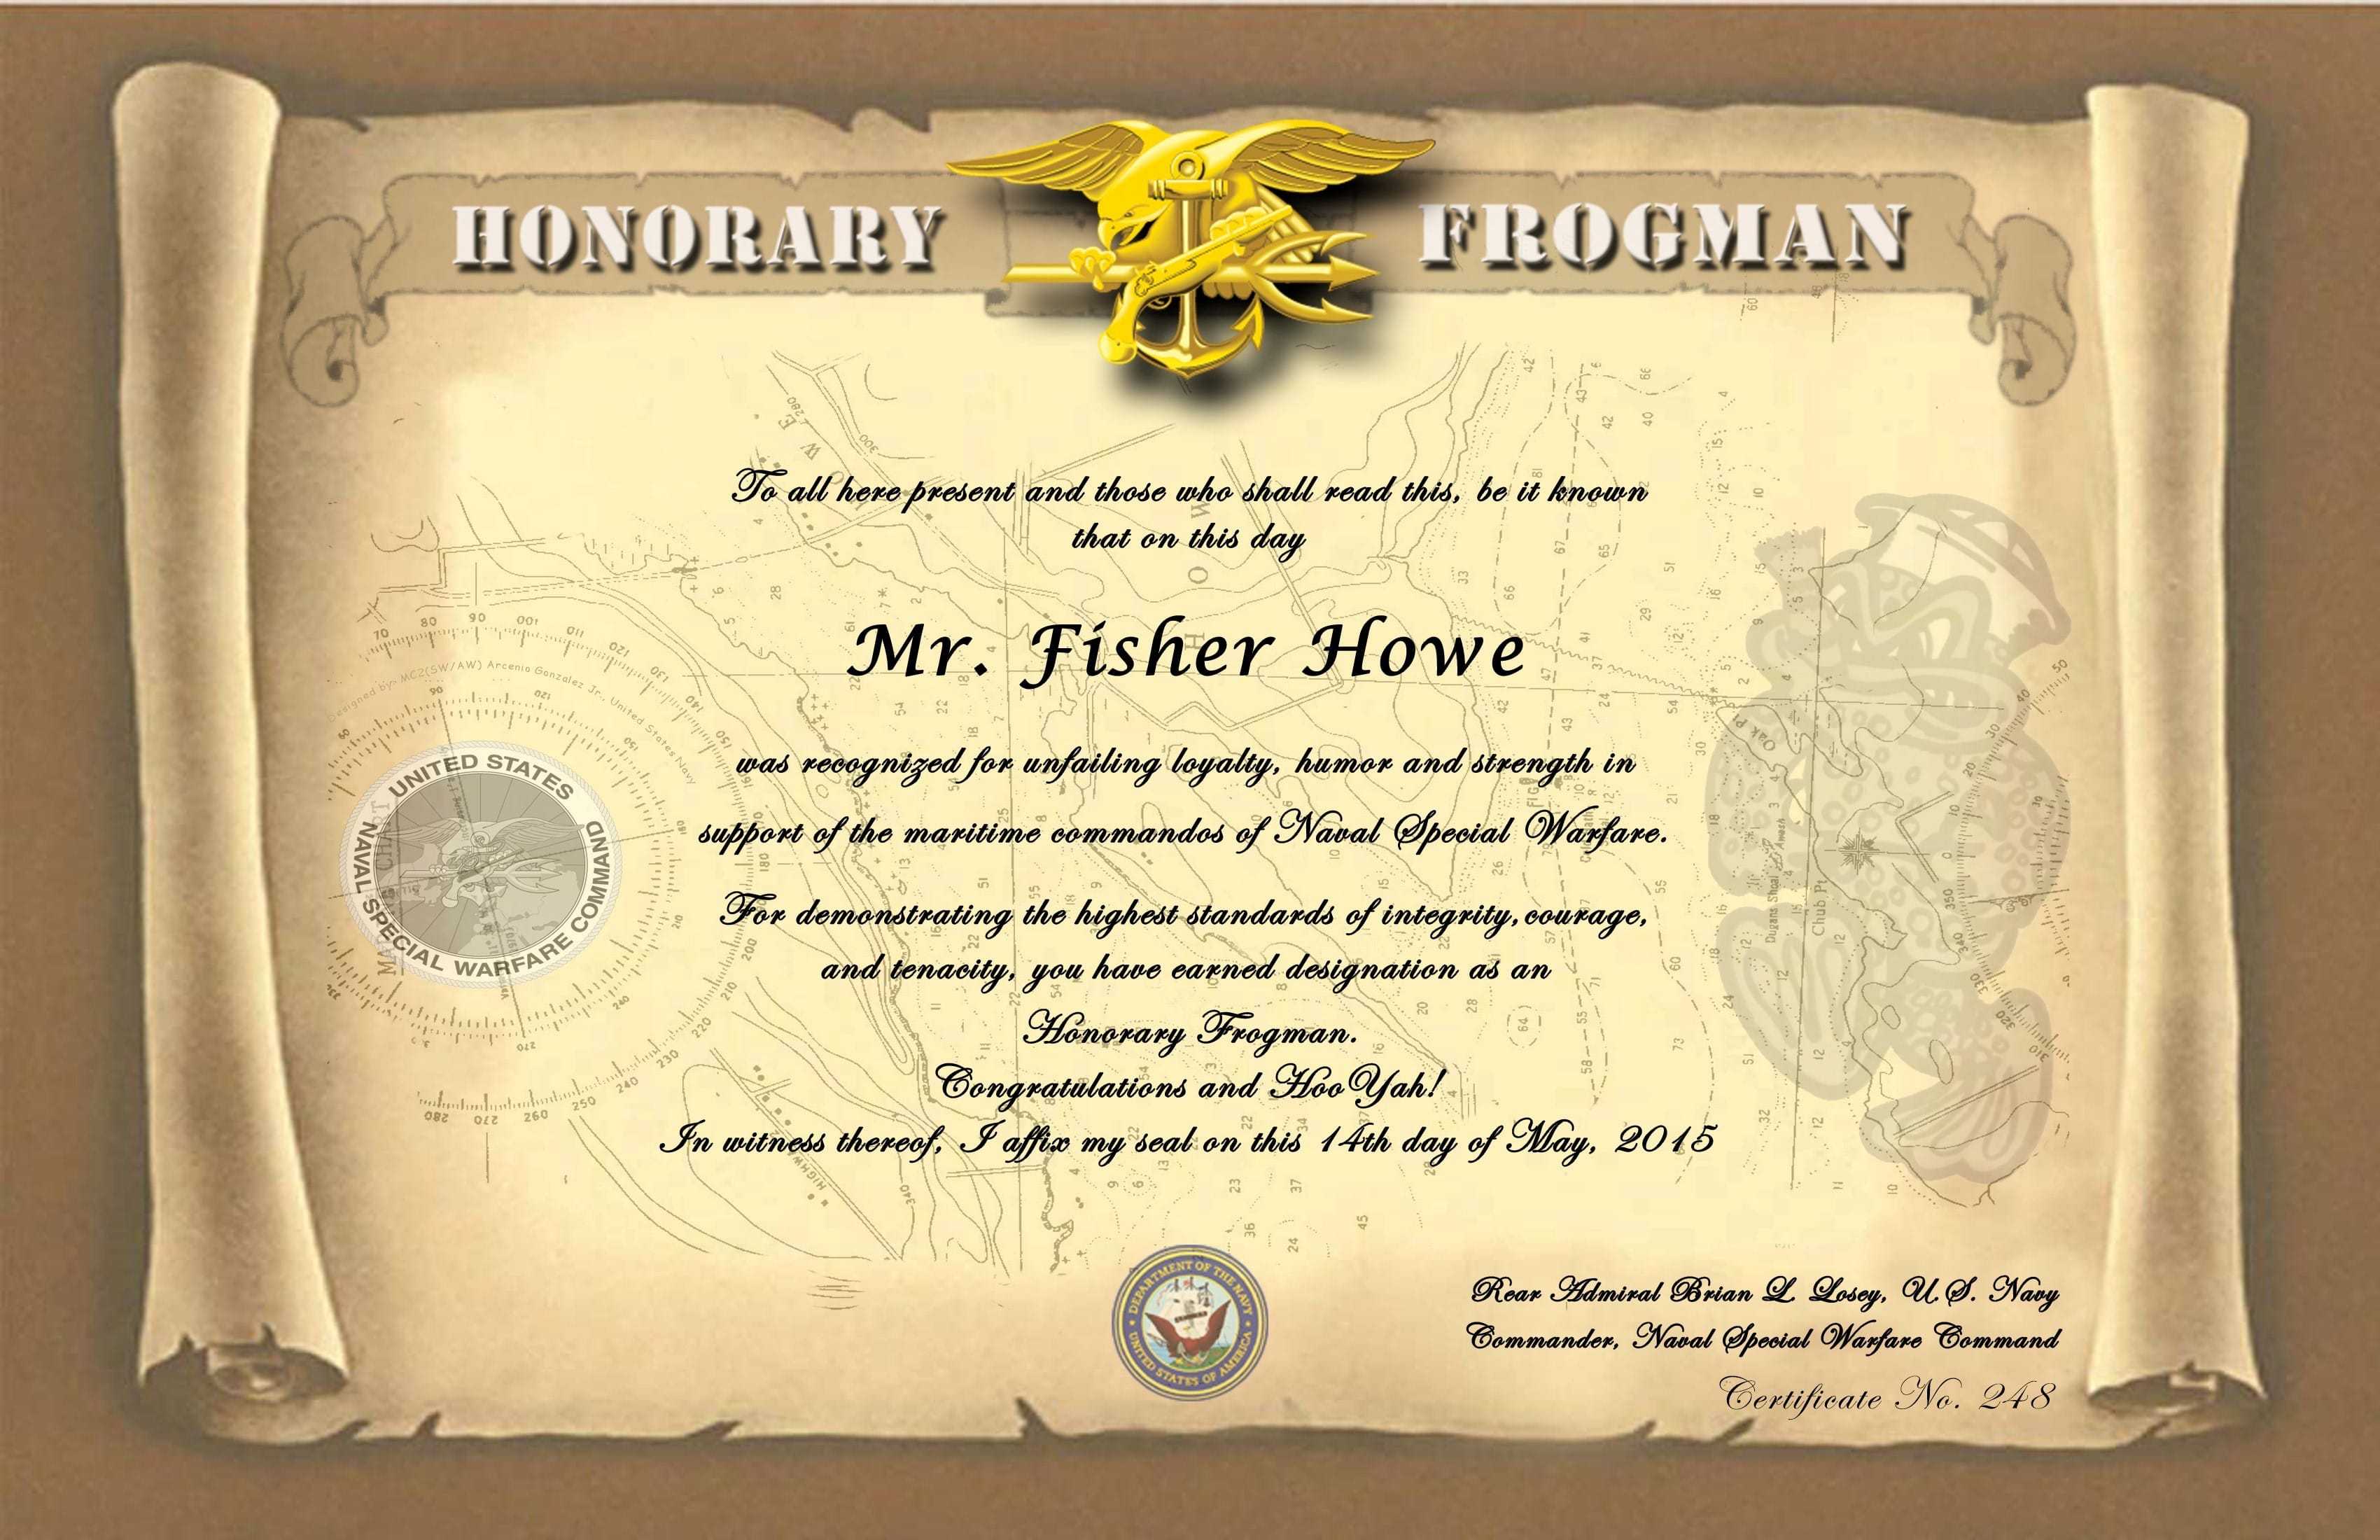 Certificate addressed to Mr. Fisher Howe.